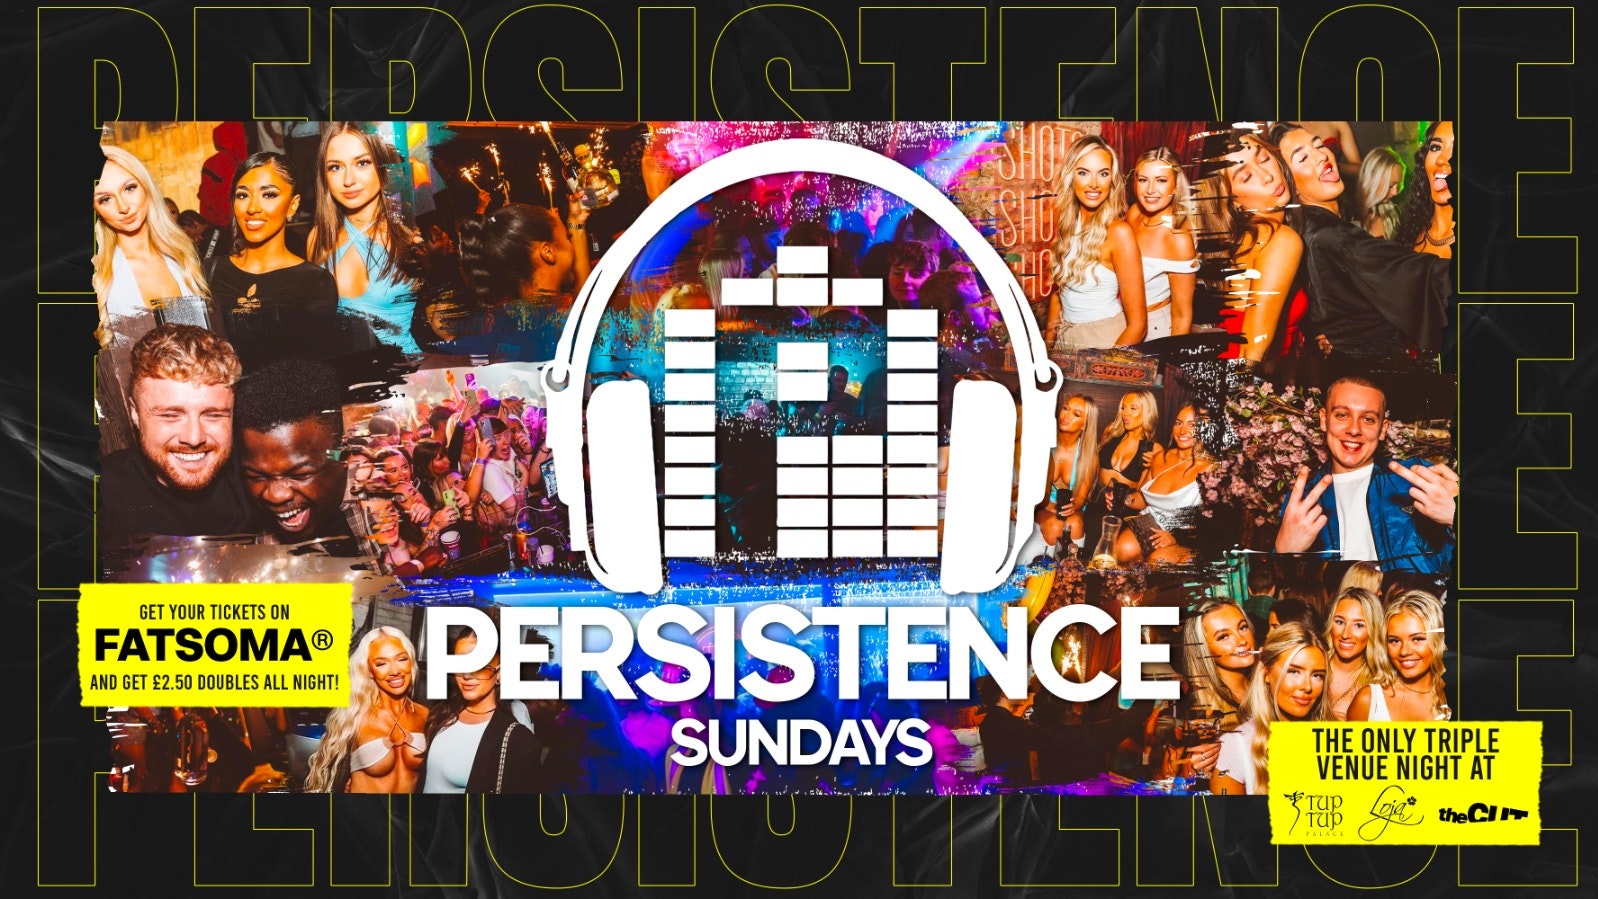 PERSISTENCE | £2.50 DOUBLES WITH A TICKET! | TUP TUP PALACE, LOJA & THE CUT | 2nd APRIL